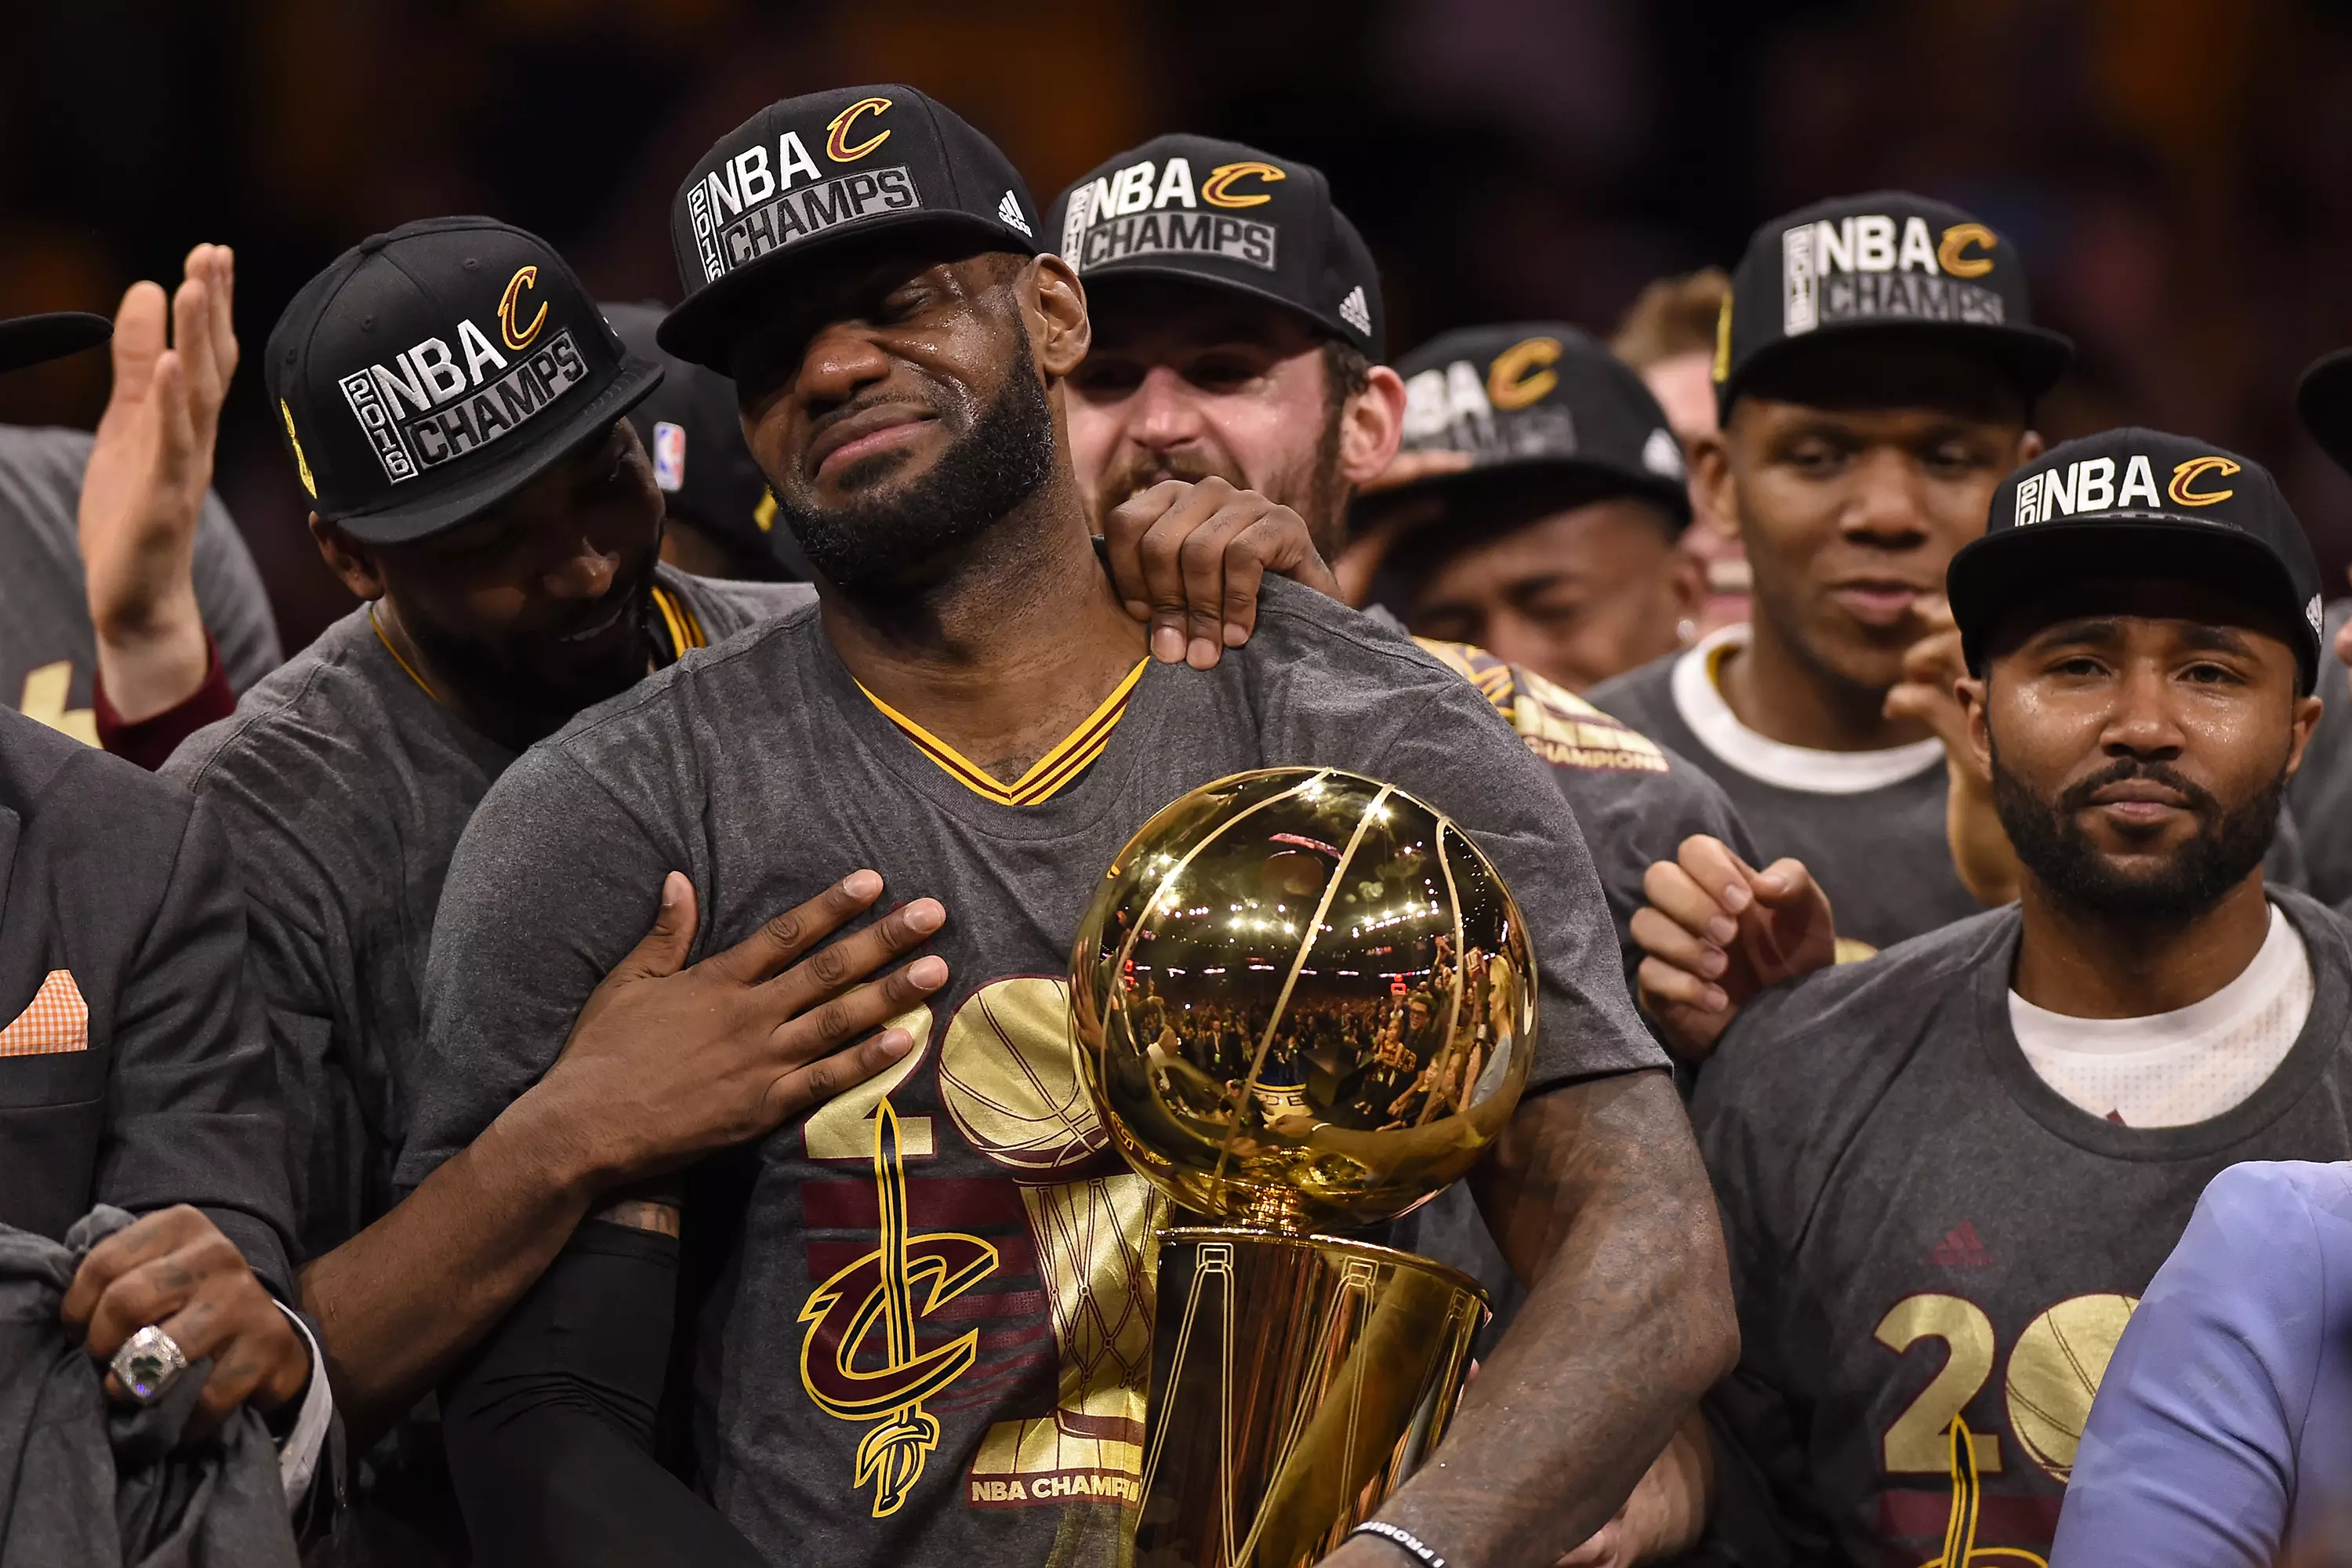 LeBron hasn't won a championship since 2016 with the Cleveland Cavaliers.